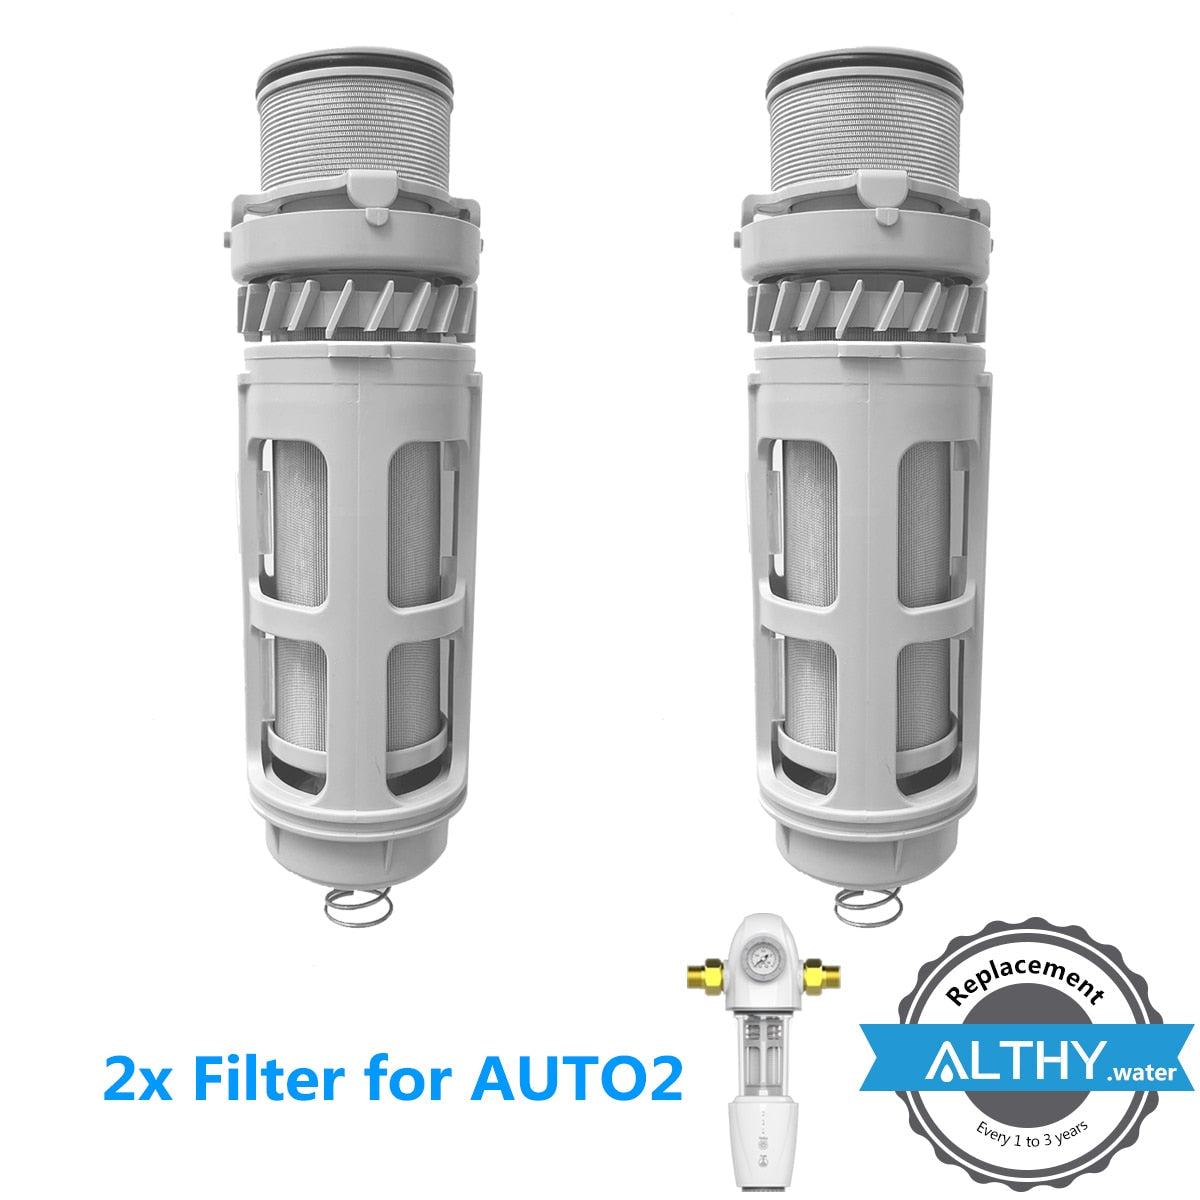 Backwash Water Filter Replacement For ALTHY PRE1 / PRE2 / PRE3 / PRE4 / AUTO2 Central Prefilter System Stainless Steel Mesh 2xfilterforAUTO2China Hardware > Plumbing > Water Dispensing & Filtration 110.99 EZYSELLA SHOP